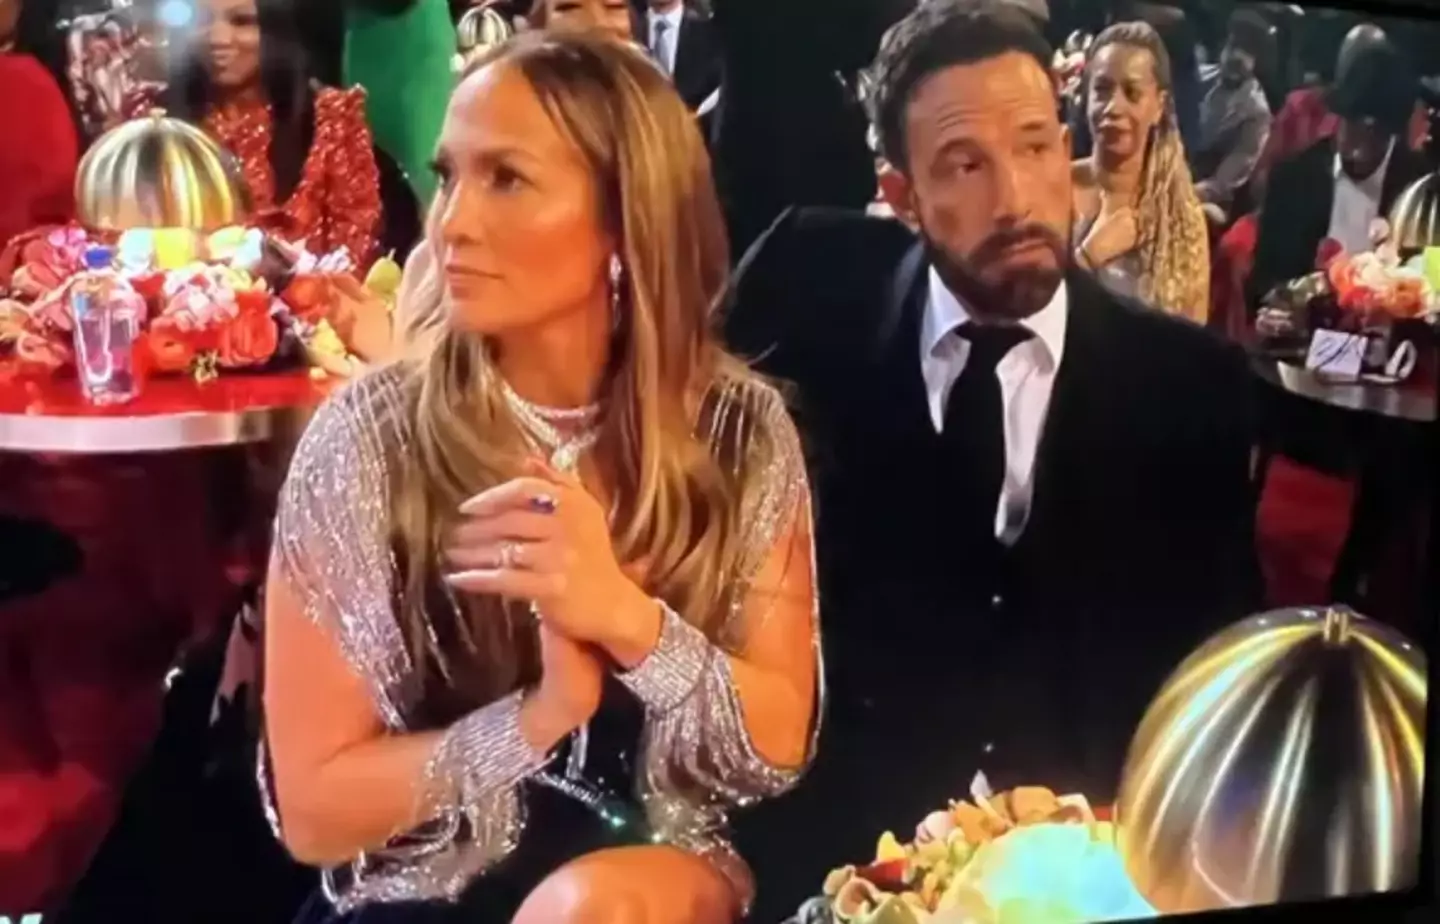 Ben Affleck became a meme for looking bored at the Grammys.